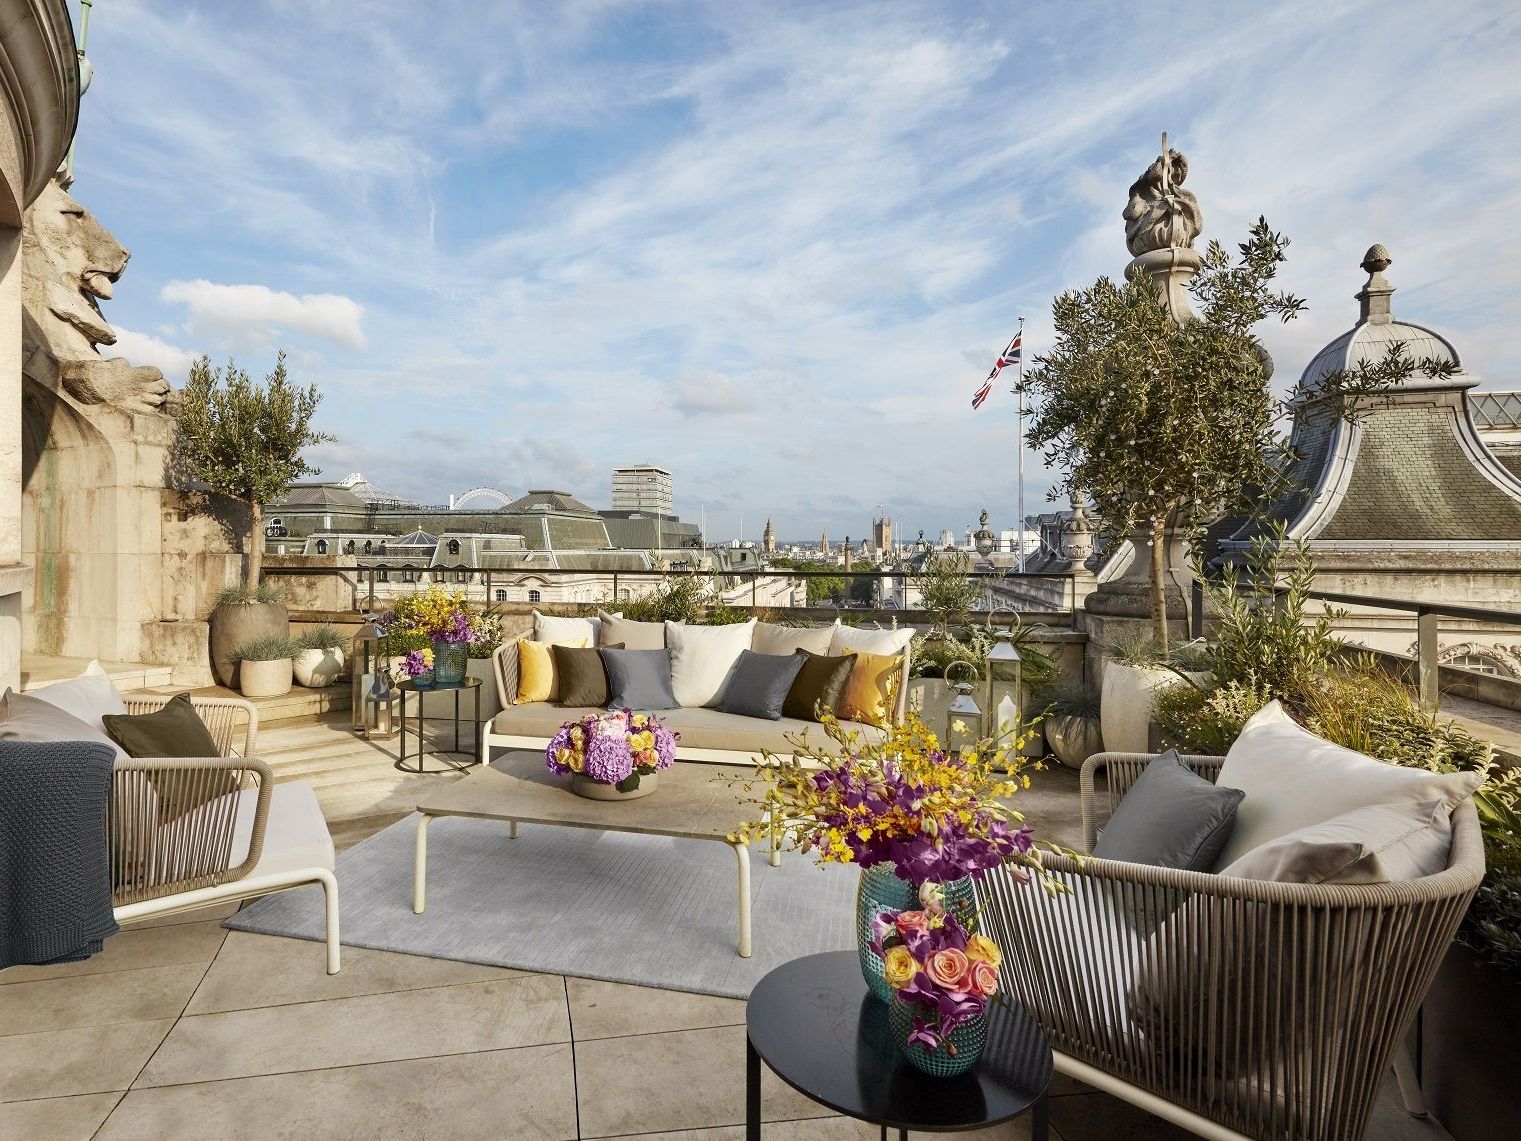 Dome penthouse hotel cafe royal london terrace view